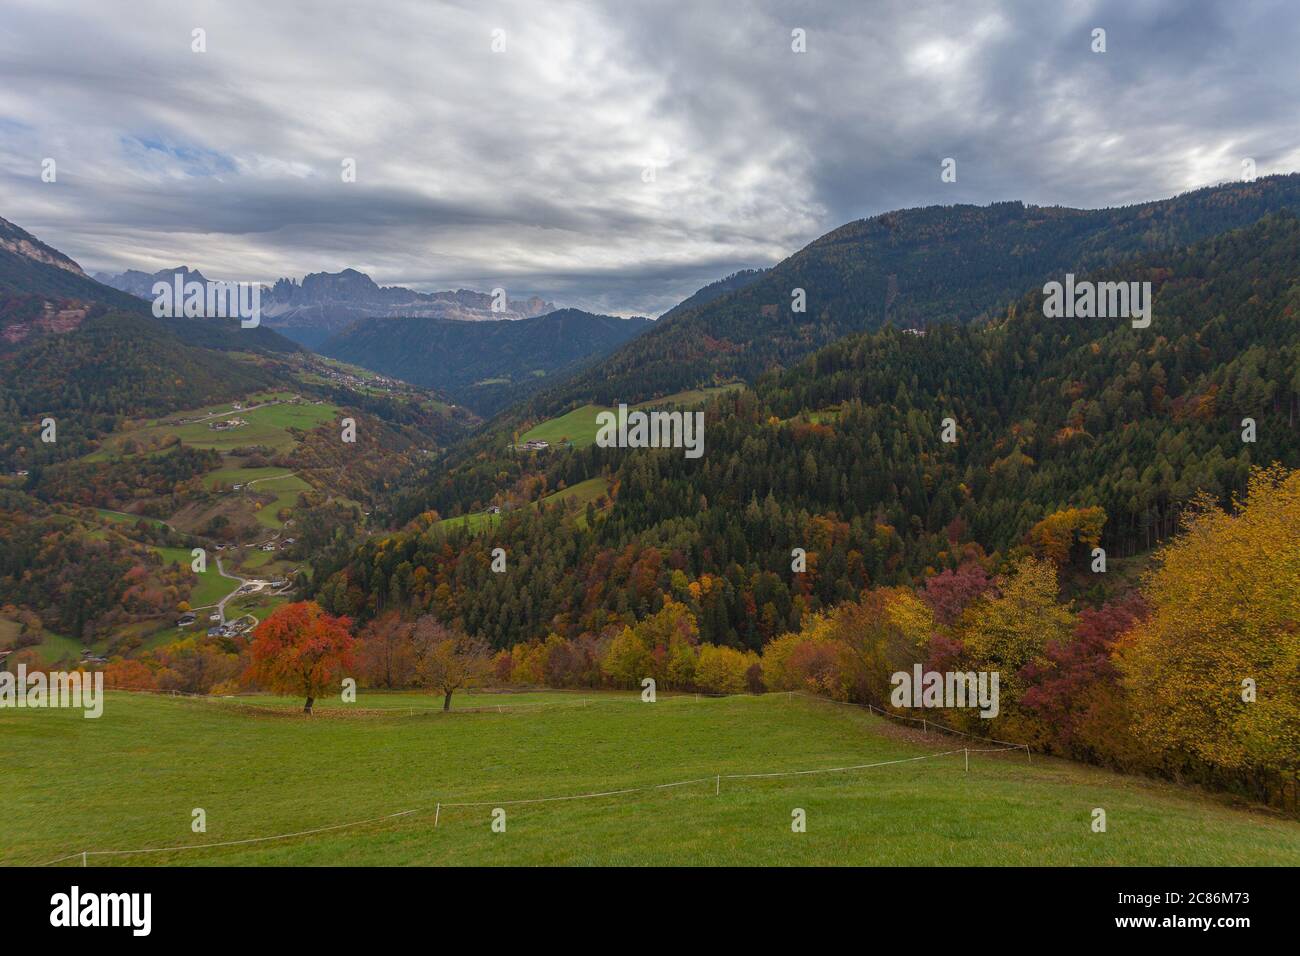 Panorama of the Val di Tires with autumn color in a cloudy day, South Tyrol, Italy. Concept: autumnal Dolomite landscapes Stock Photo